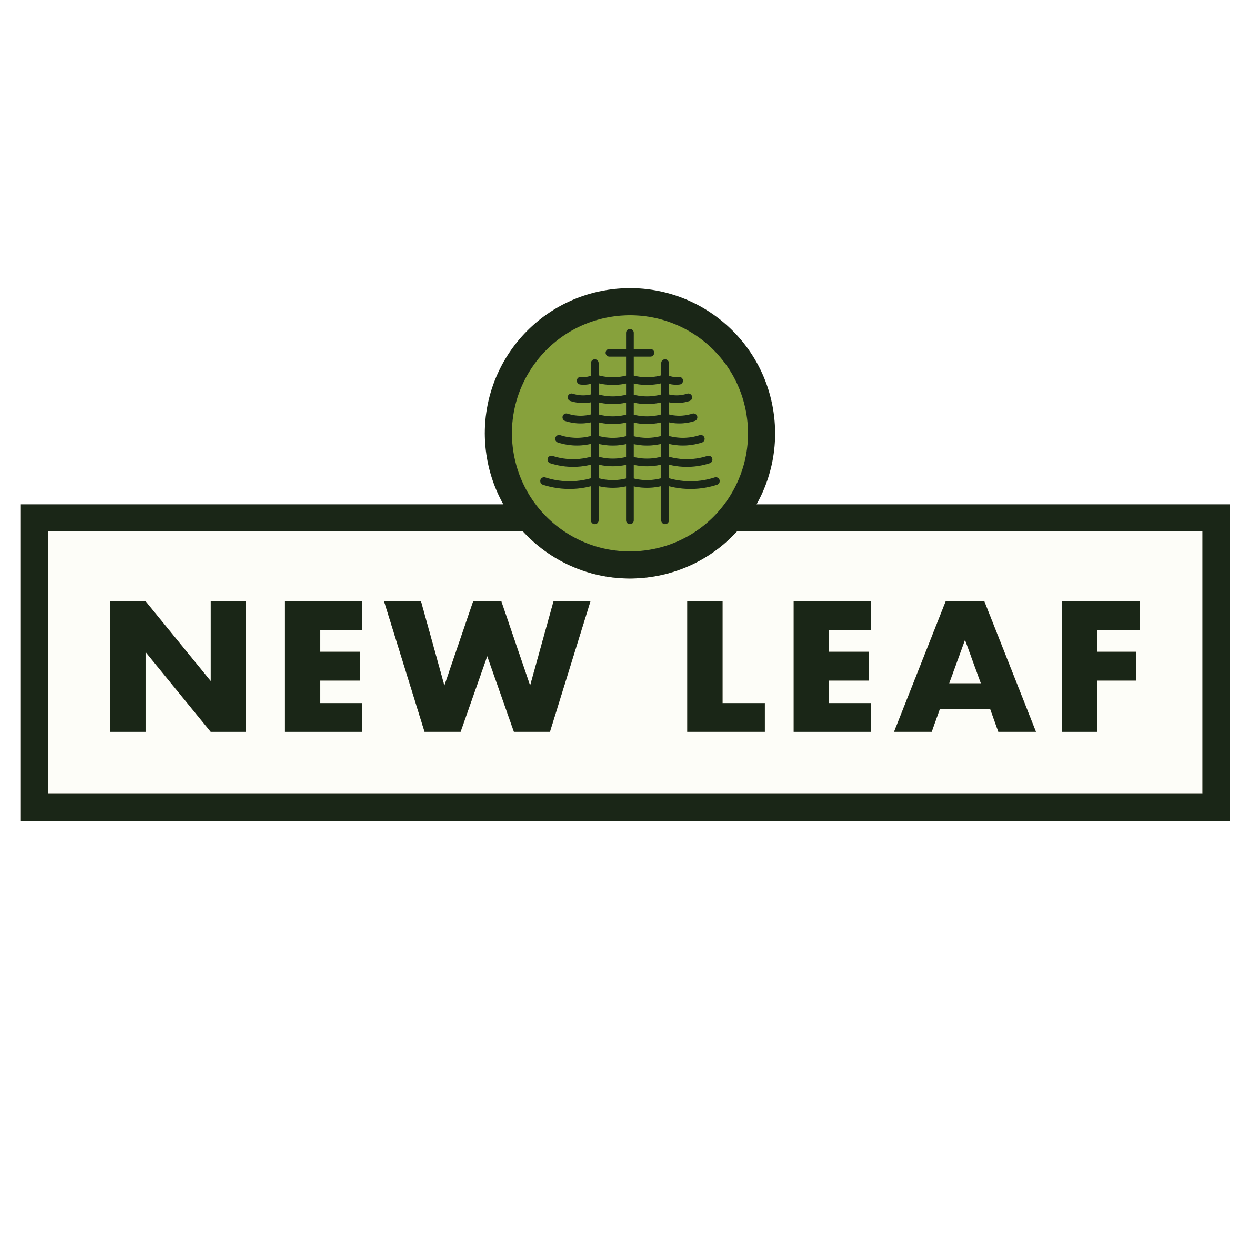 The New Leaf Network